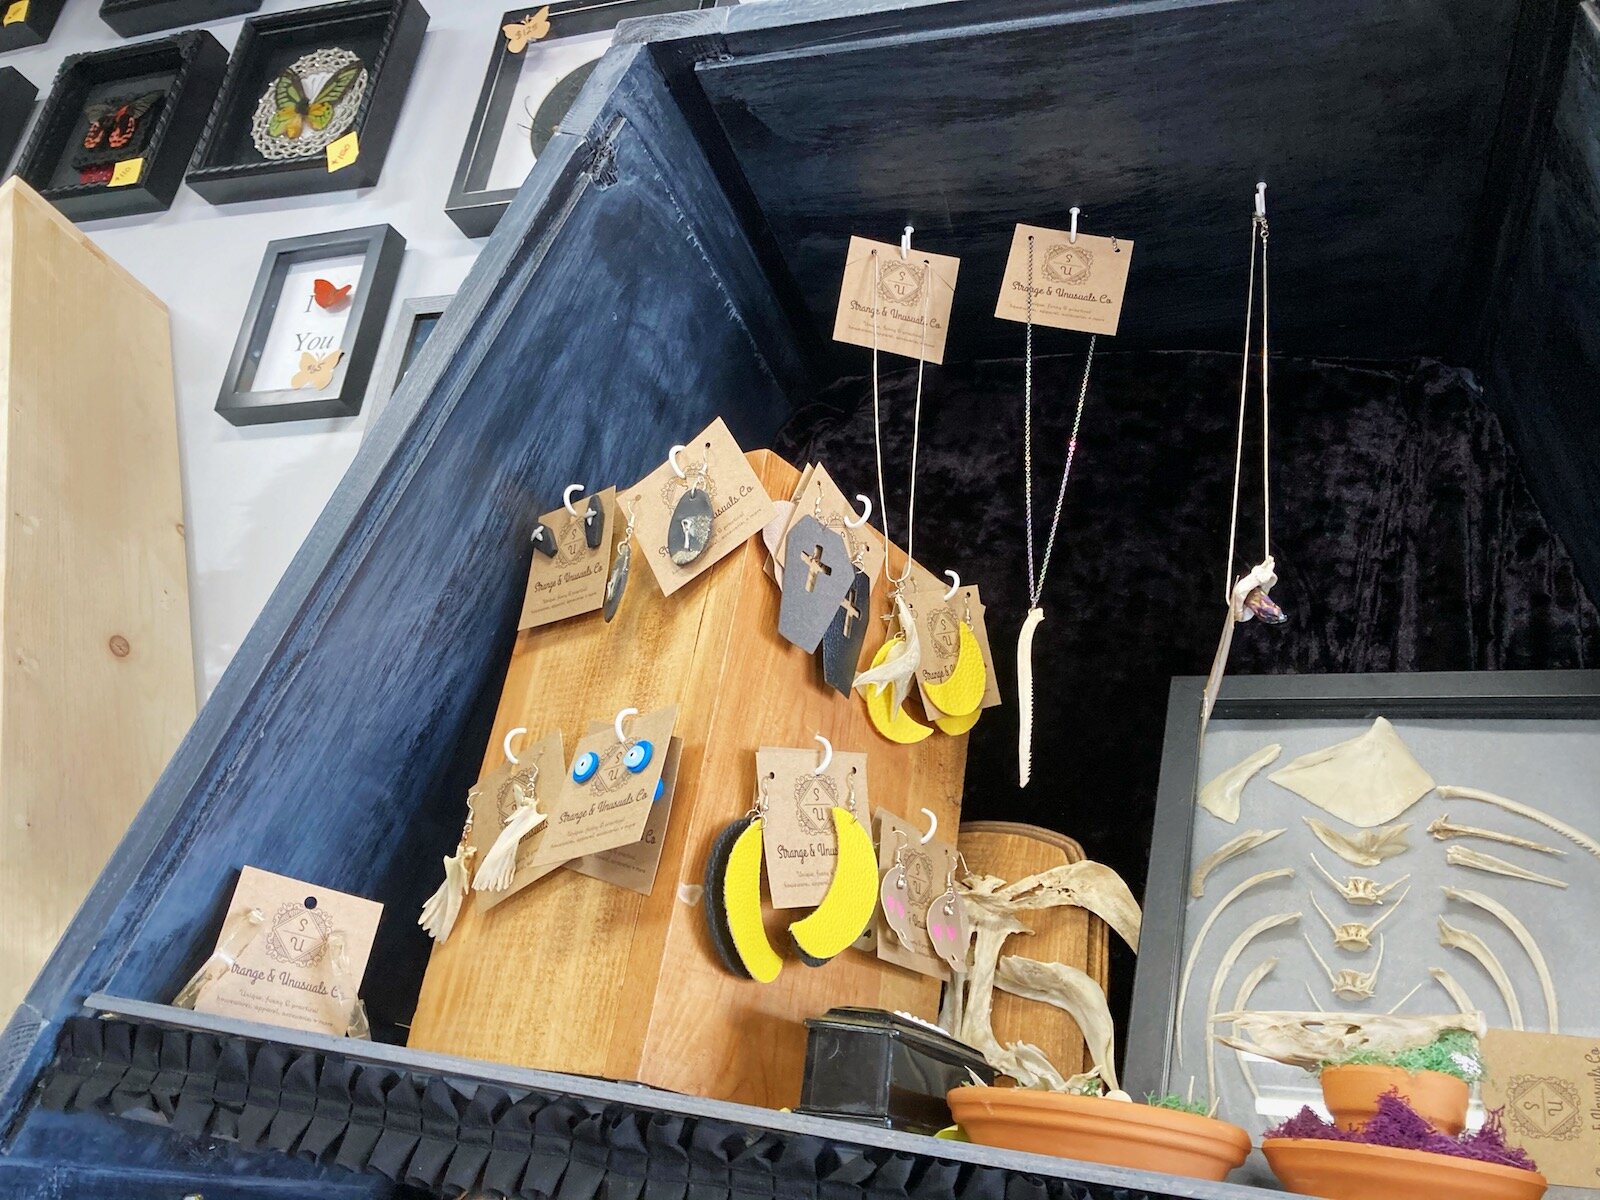 Makers of many kinds sell their crafts at Fae's Cabinet.